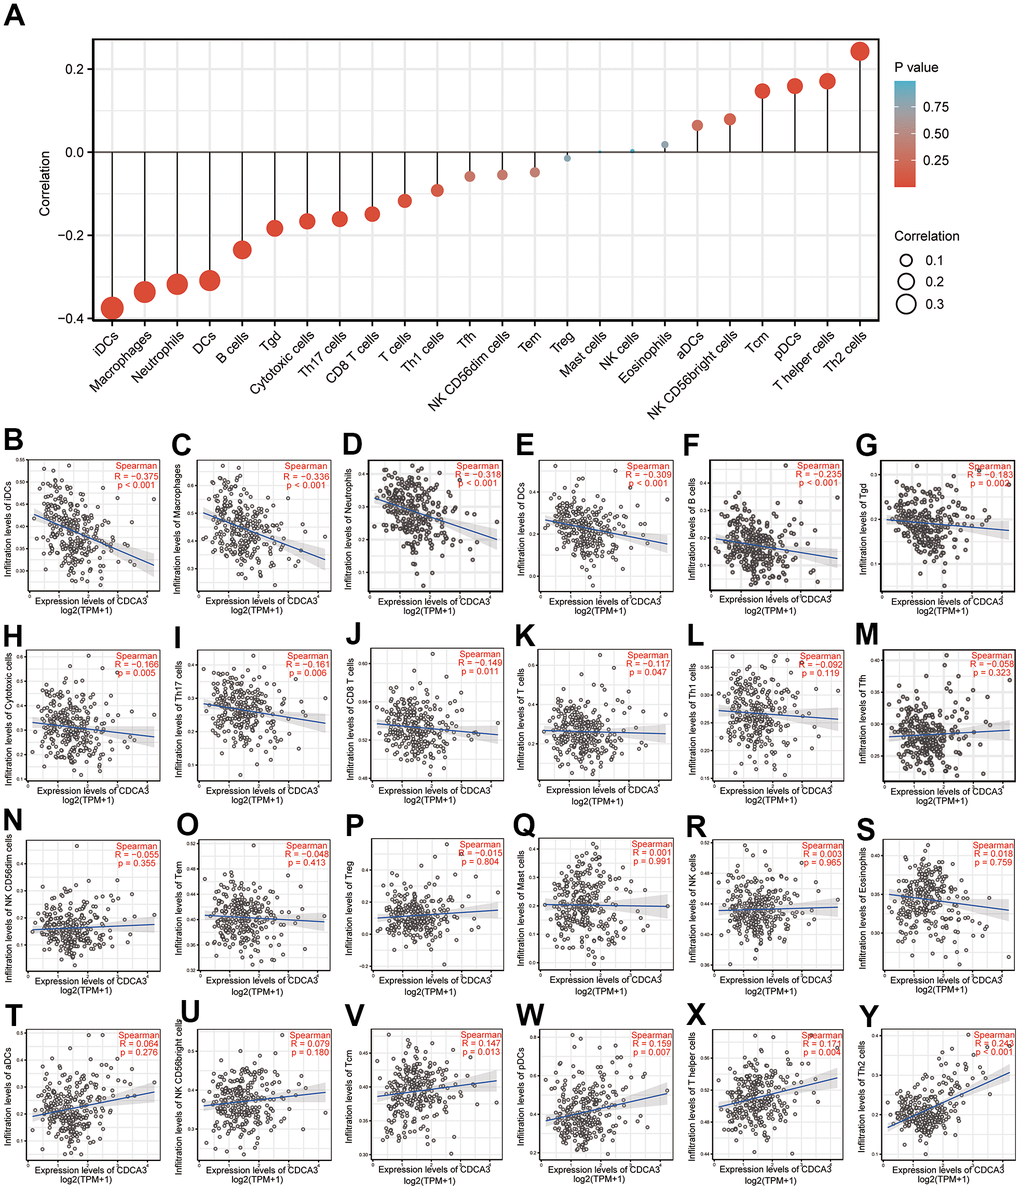 Immune cell infiltration. (A–Y) Spearman correlation analyses of the associations between the CDCA3 expression and the infiltration of 24 types of immune cells.